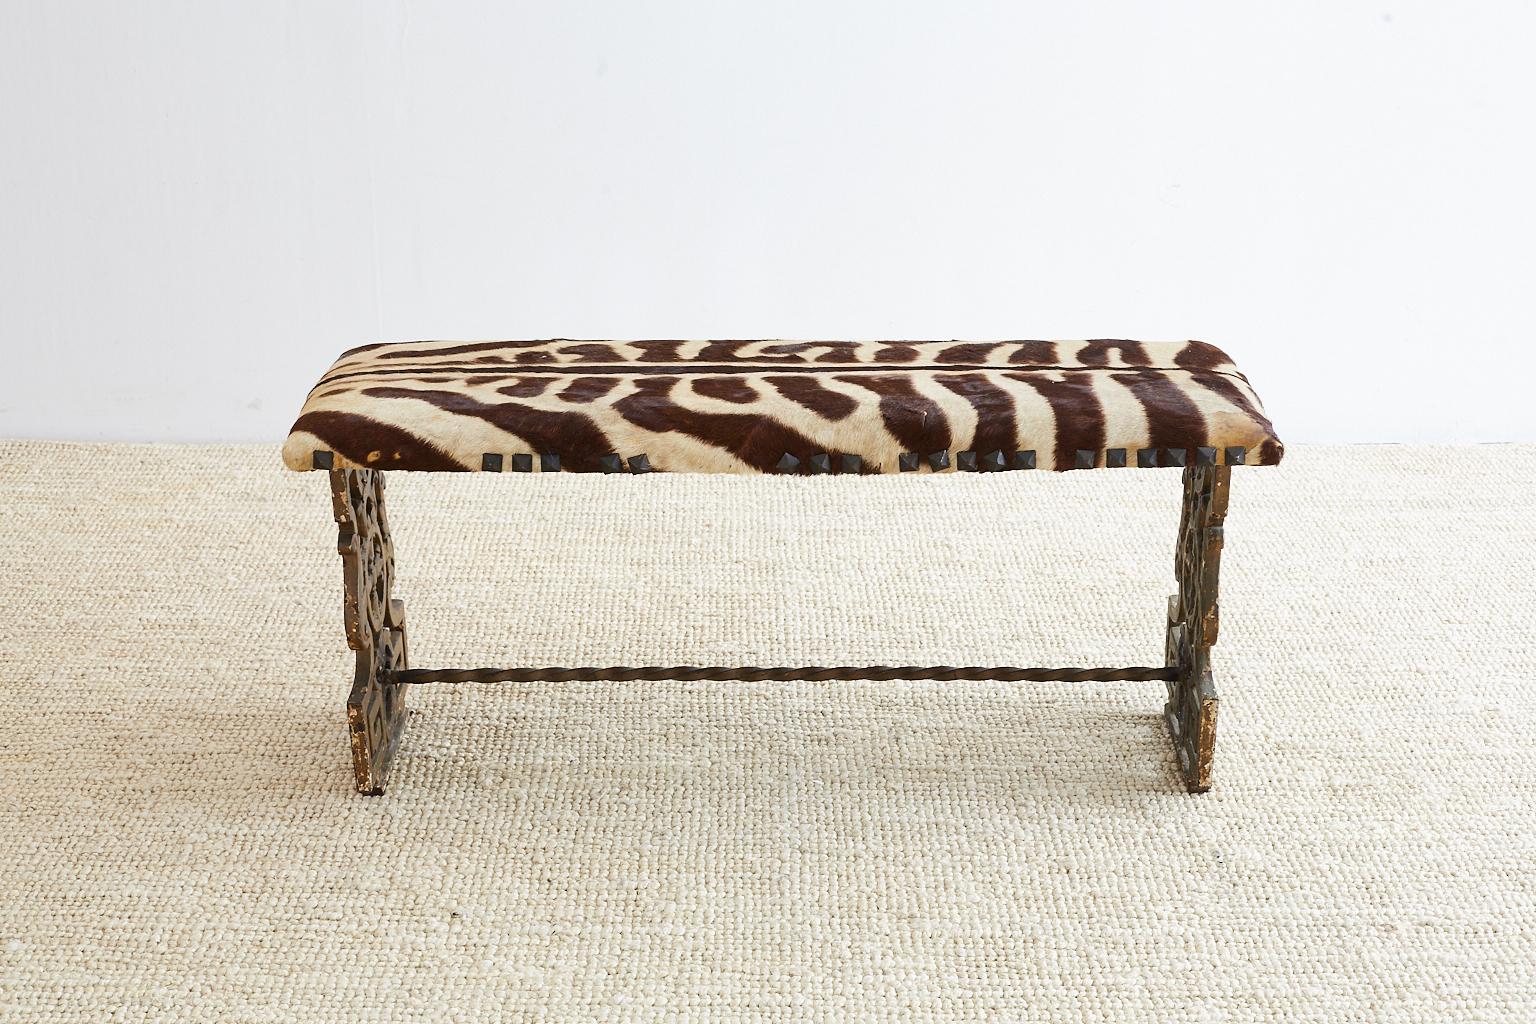 Fabulous cast iron vanity bench made in the neoclassical taste featuring a vintage zebra leather hide upholstery. The two legs have a Greek key motif and a distressed painted finish. Conjoined with a twisted iron stretcher and supporting bench seat